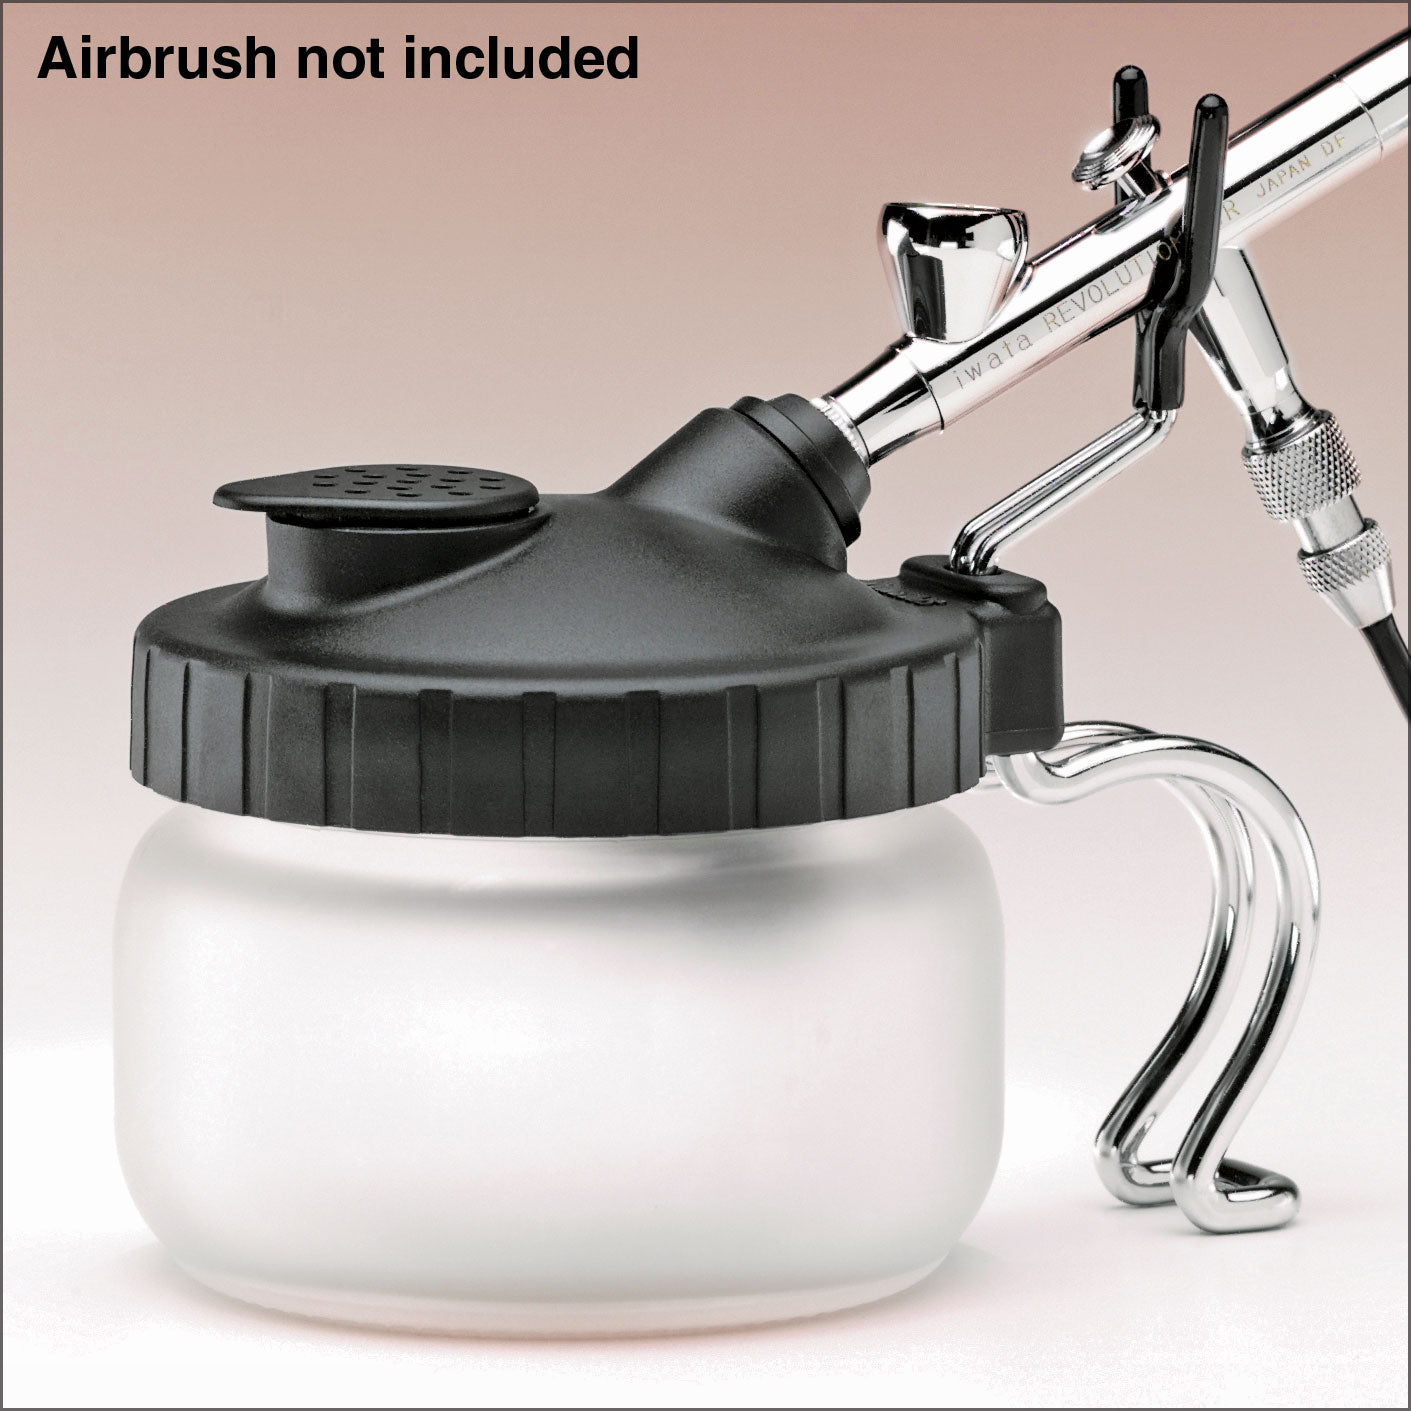 Table - Top Airbrush Cleaning Station